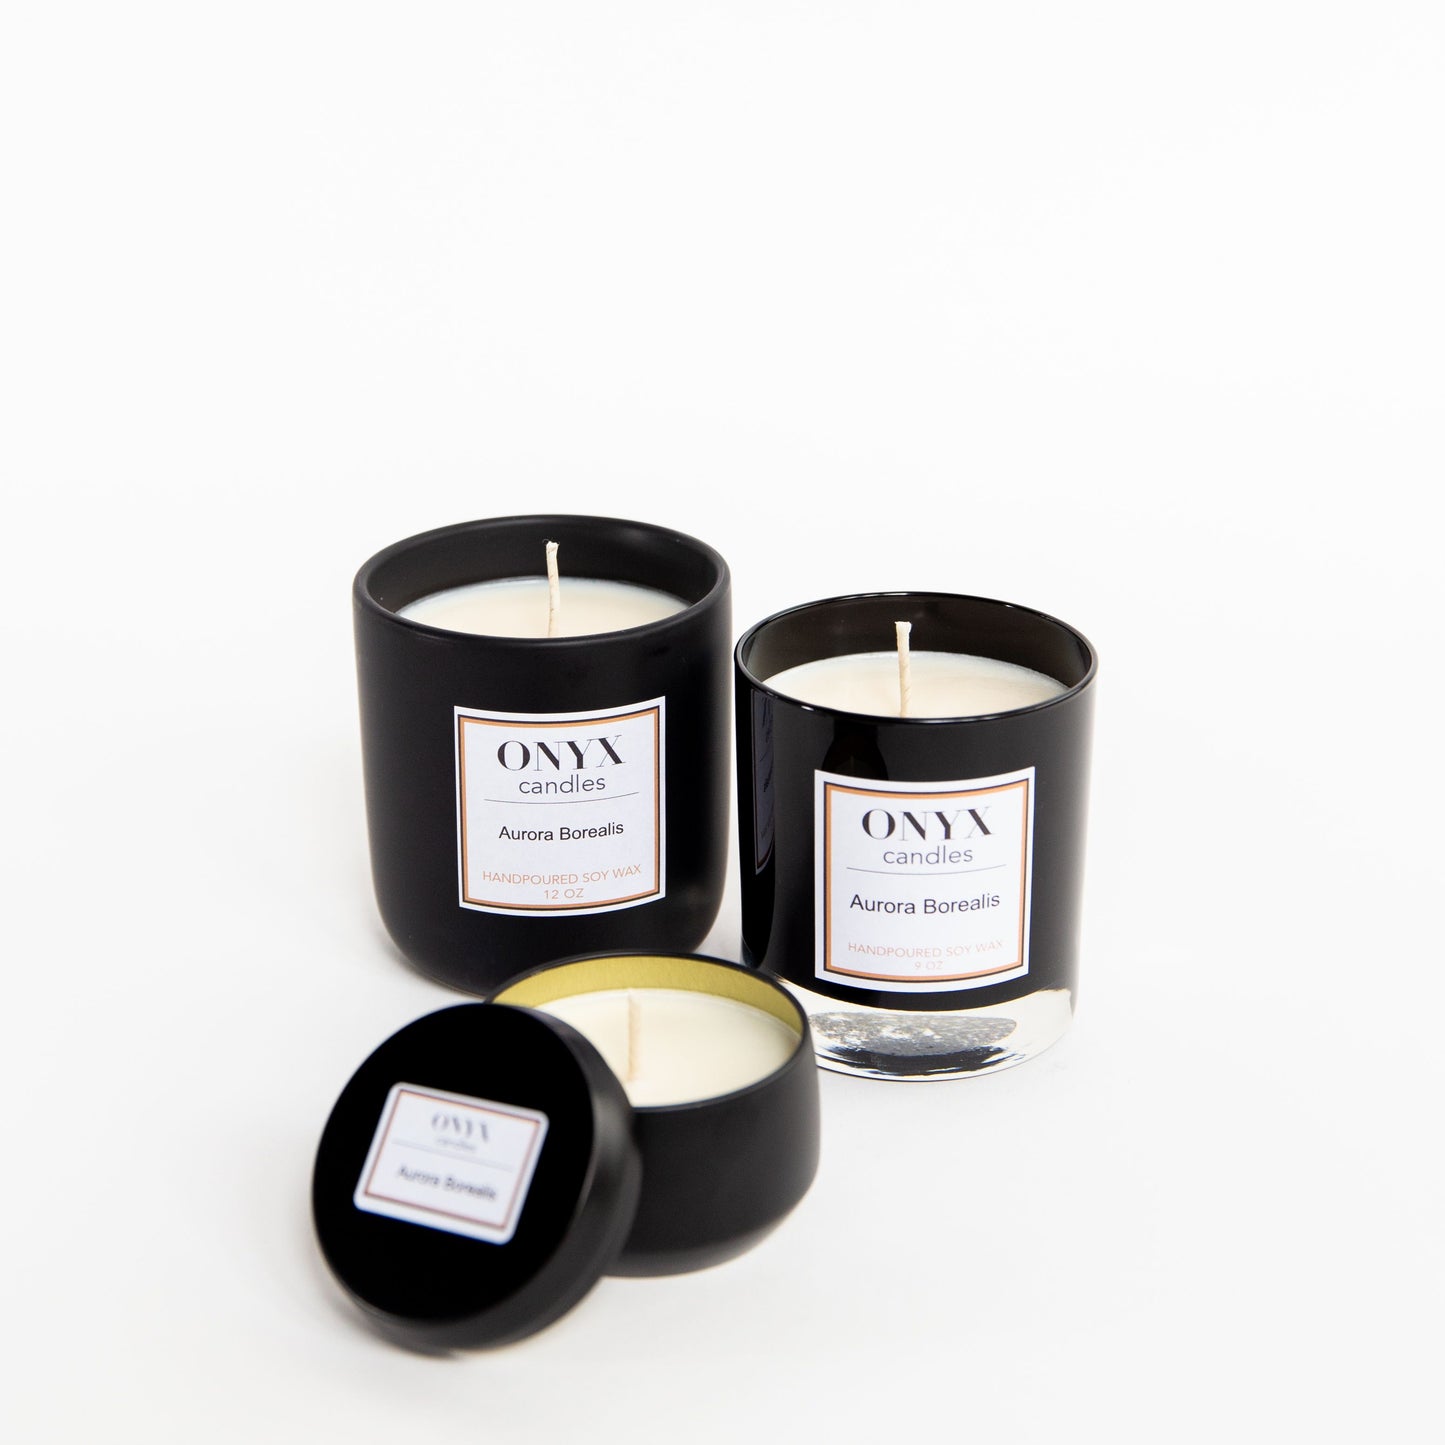 Pictured here are three size variations of Onyx Candles in the scent Aurora Borealis.